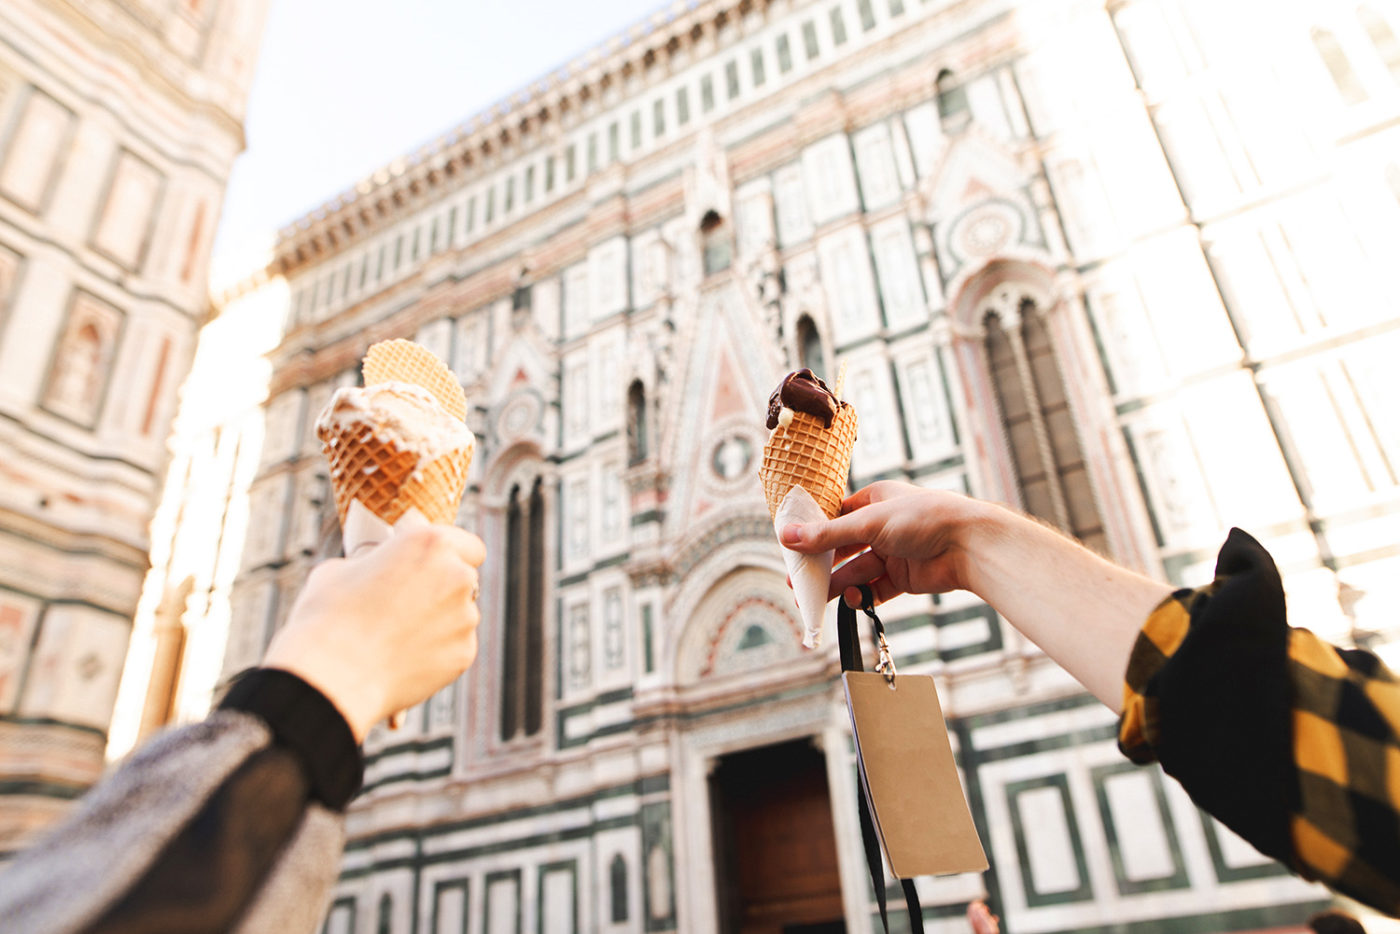 The best food in Florence can be found in unlikely places. This Florence food guide will help you discover the best eats around this incredible city.